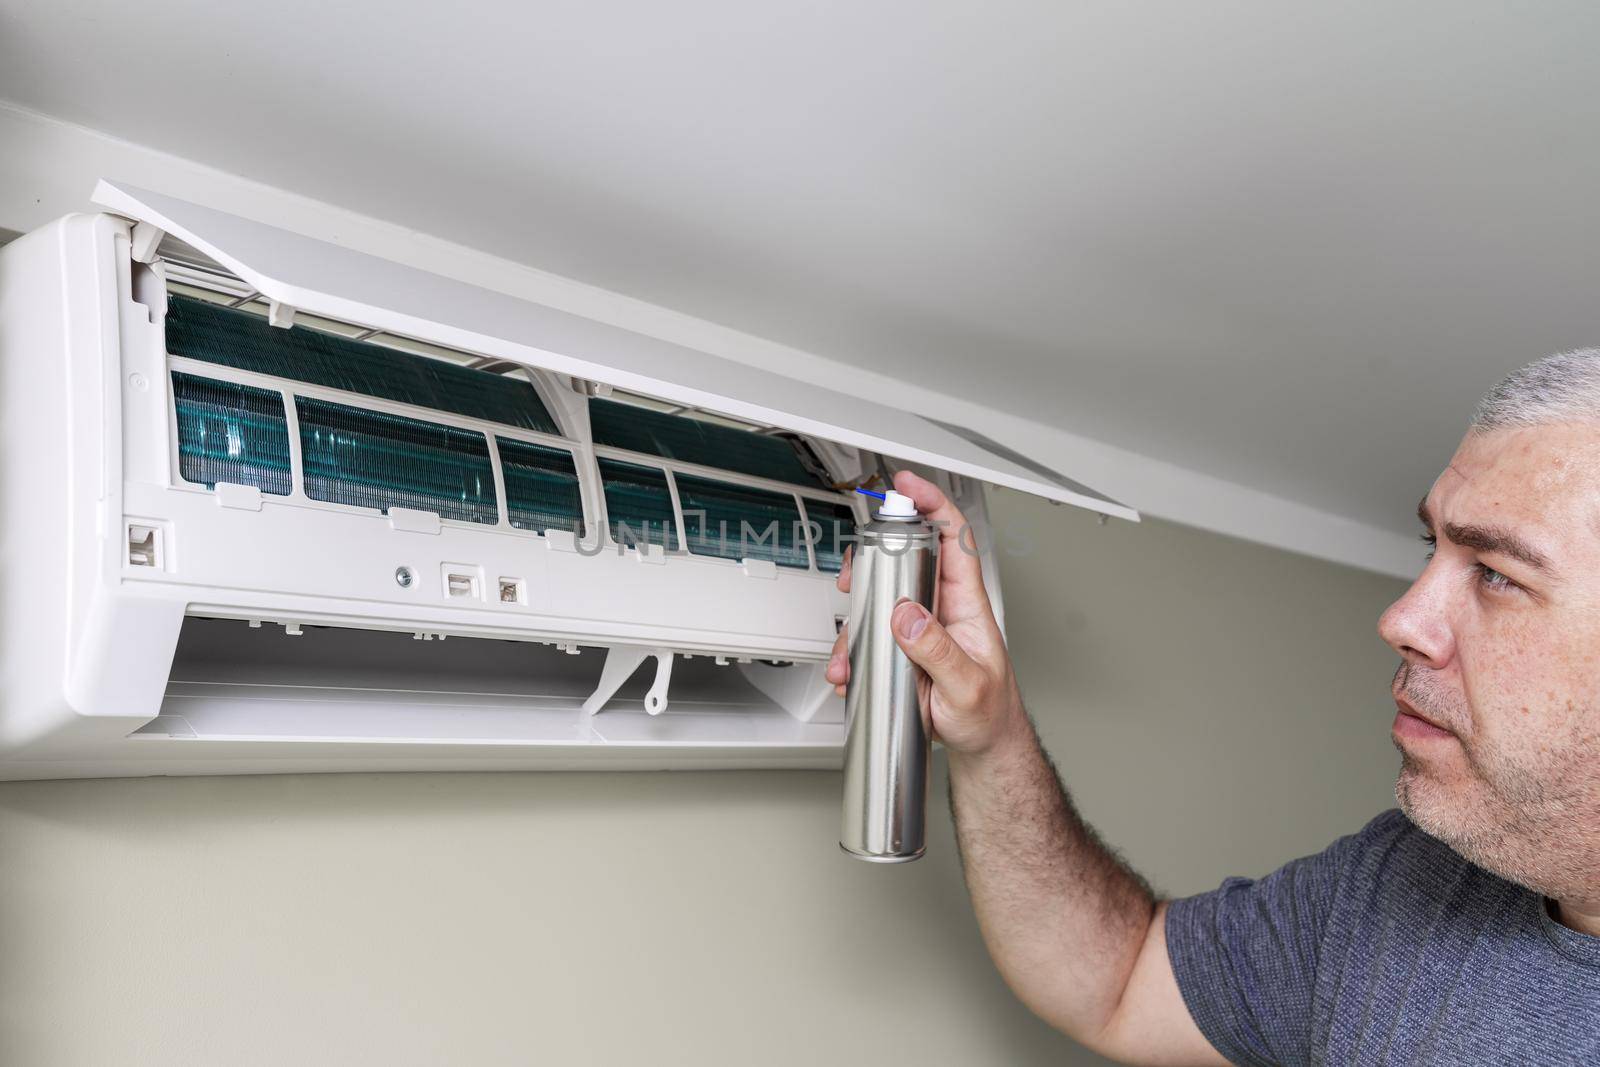 man cleans the air conditioning with antibacterial spray